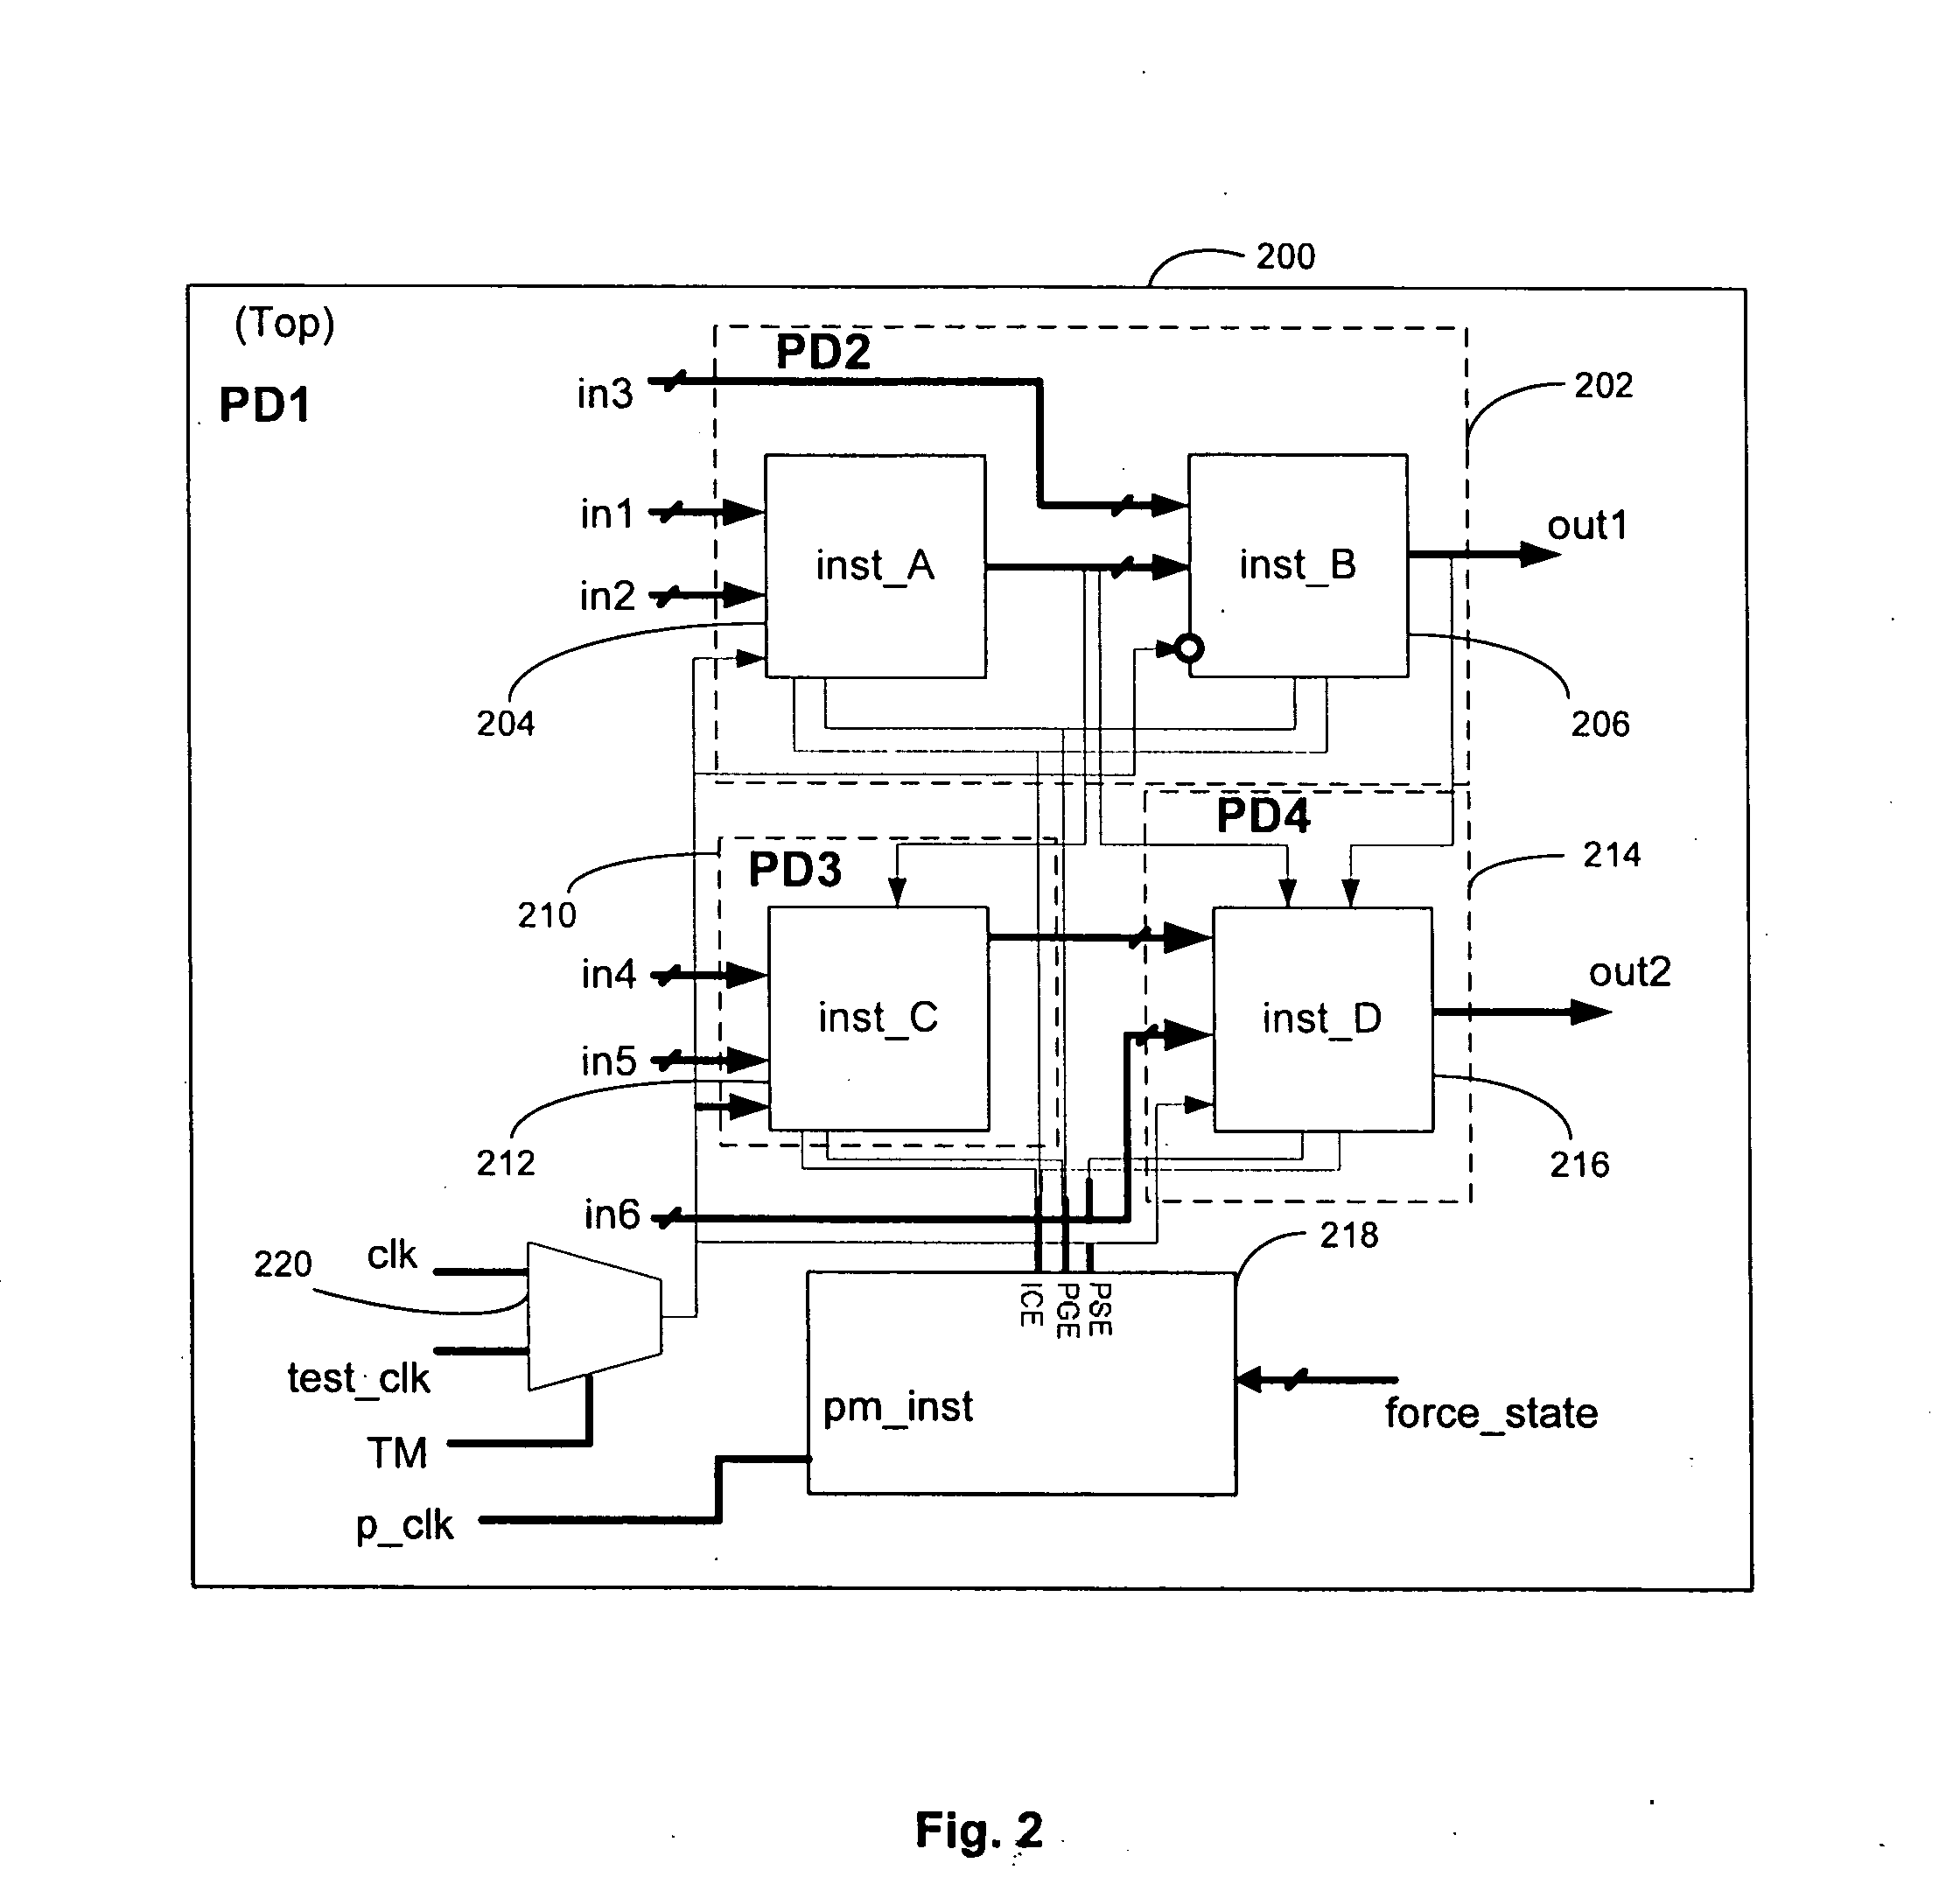 Method and system for verifying power specifications of a low power design